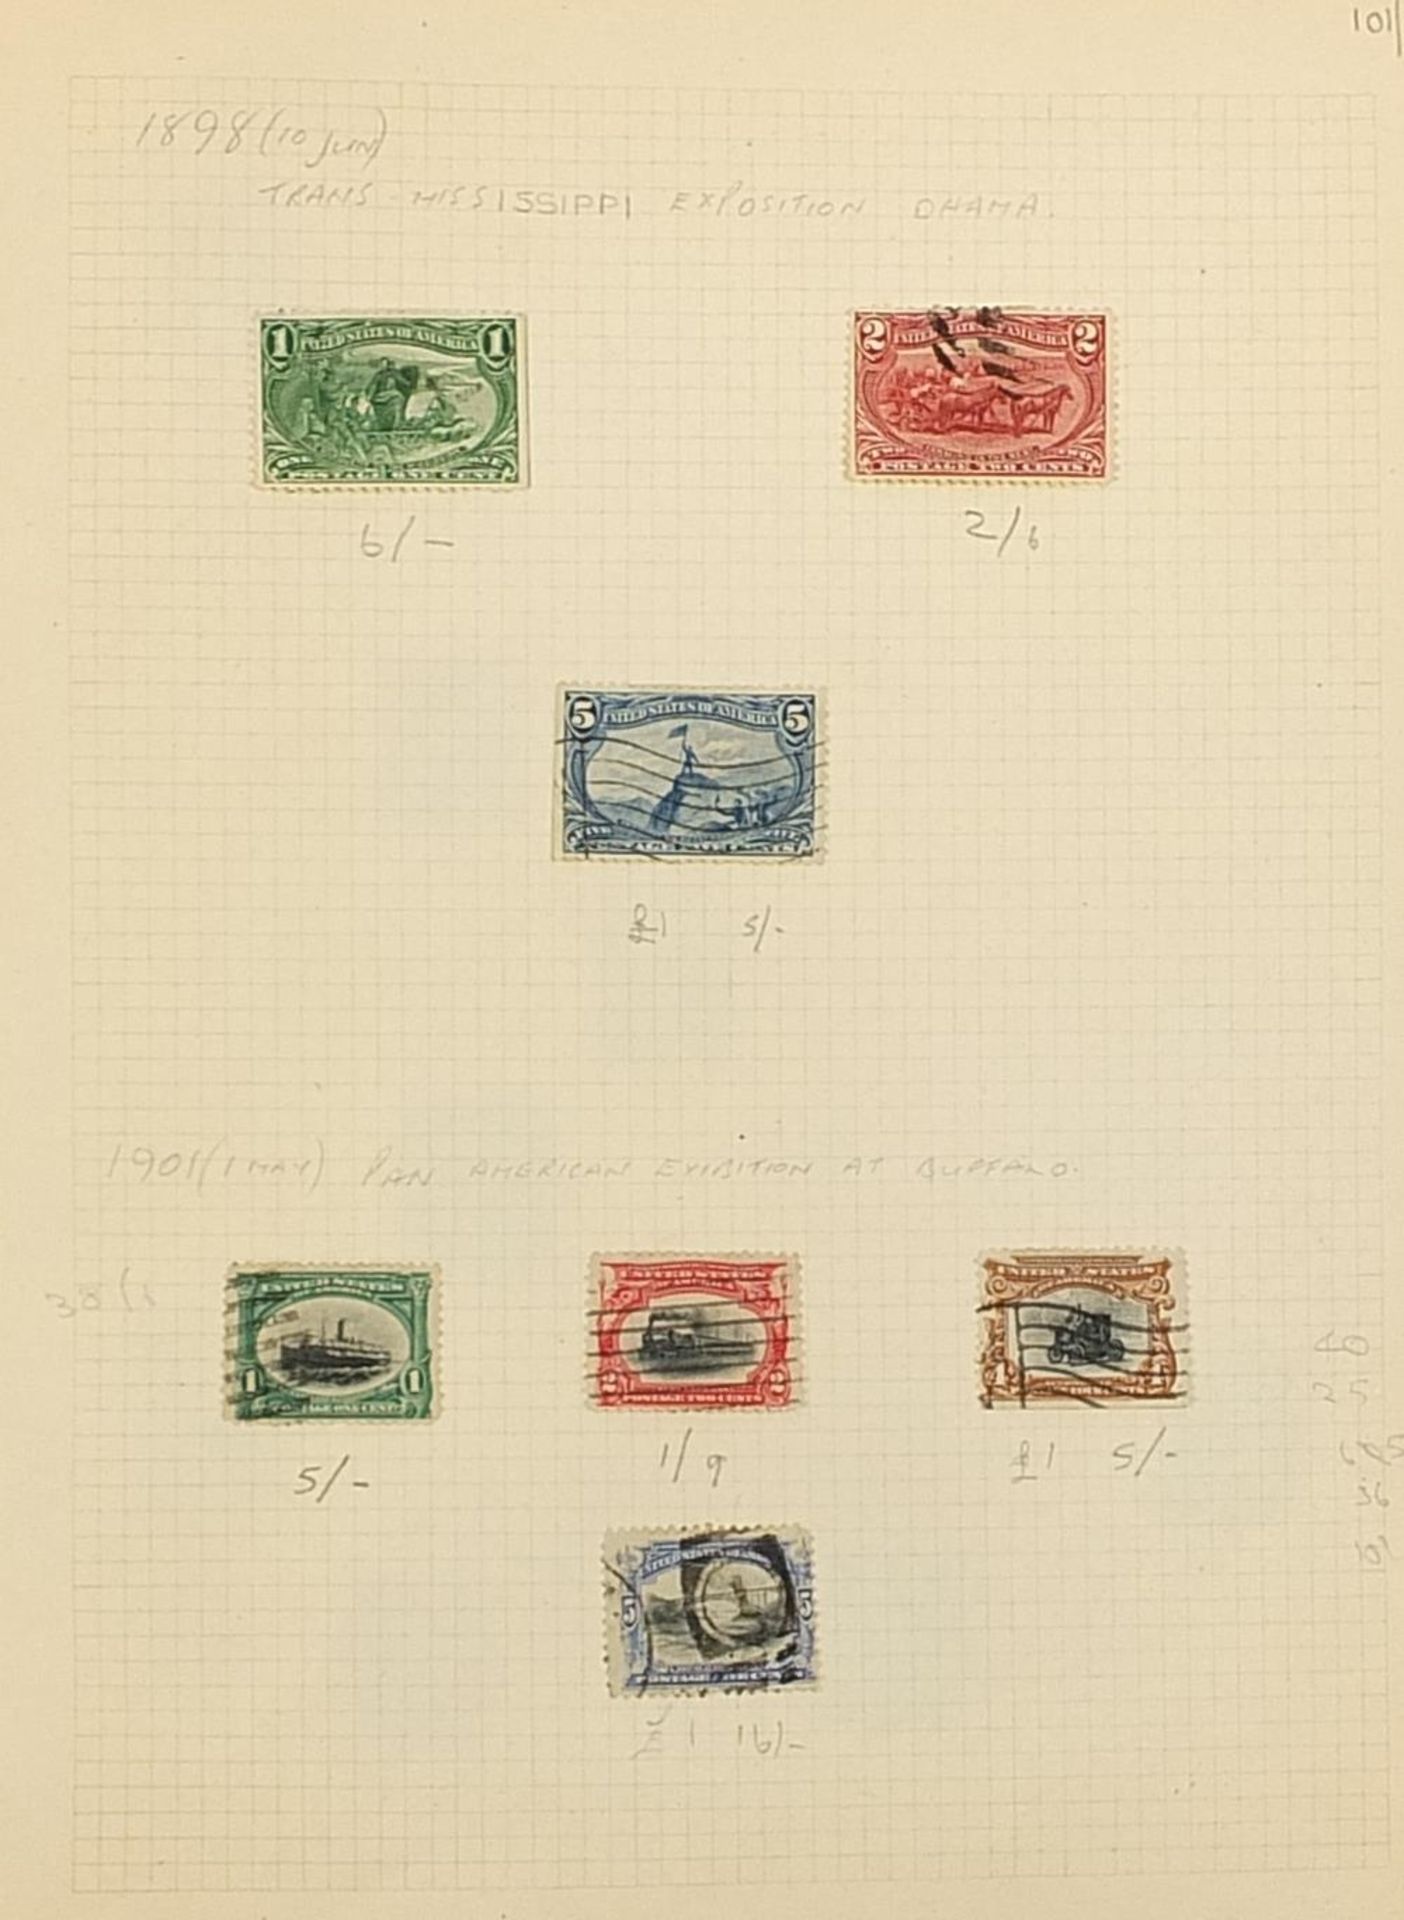 United States of America stamps from the early Presidents to 1950, arranged in an album - Image 5 of 6